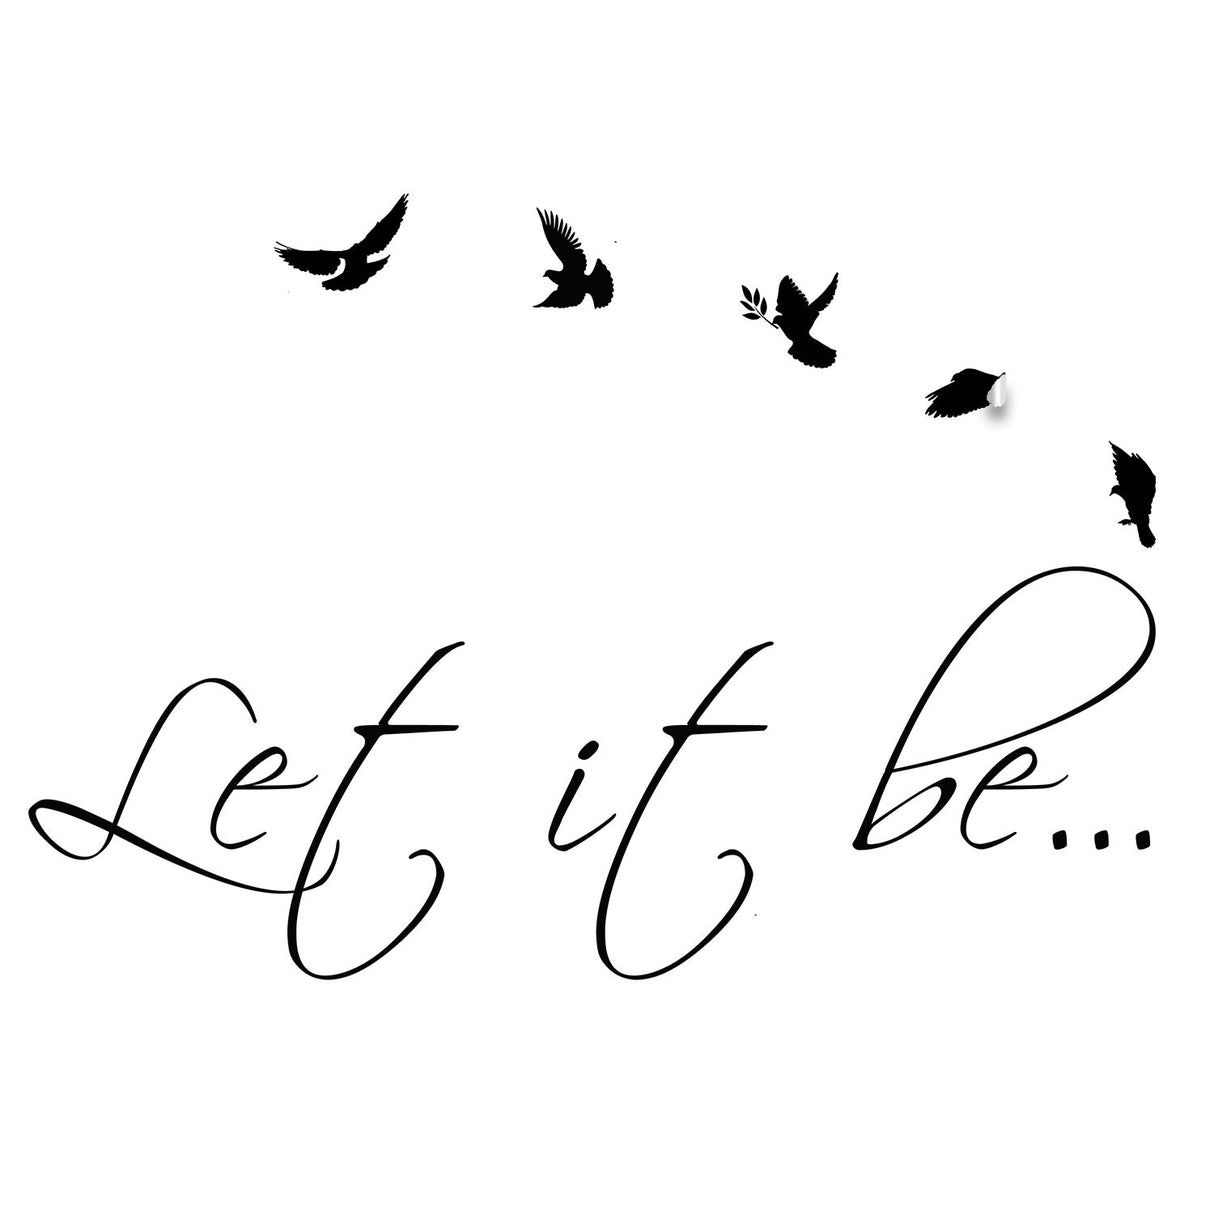 Let It Be Wall Sticker - Lets Go Love  Vinyl Decal